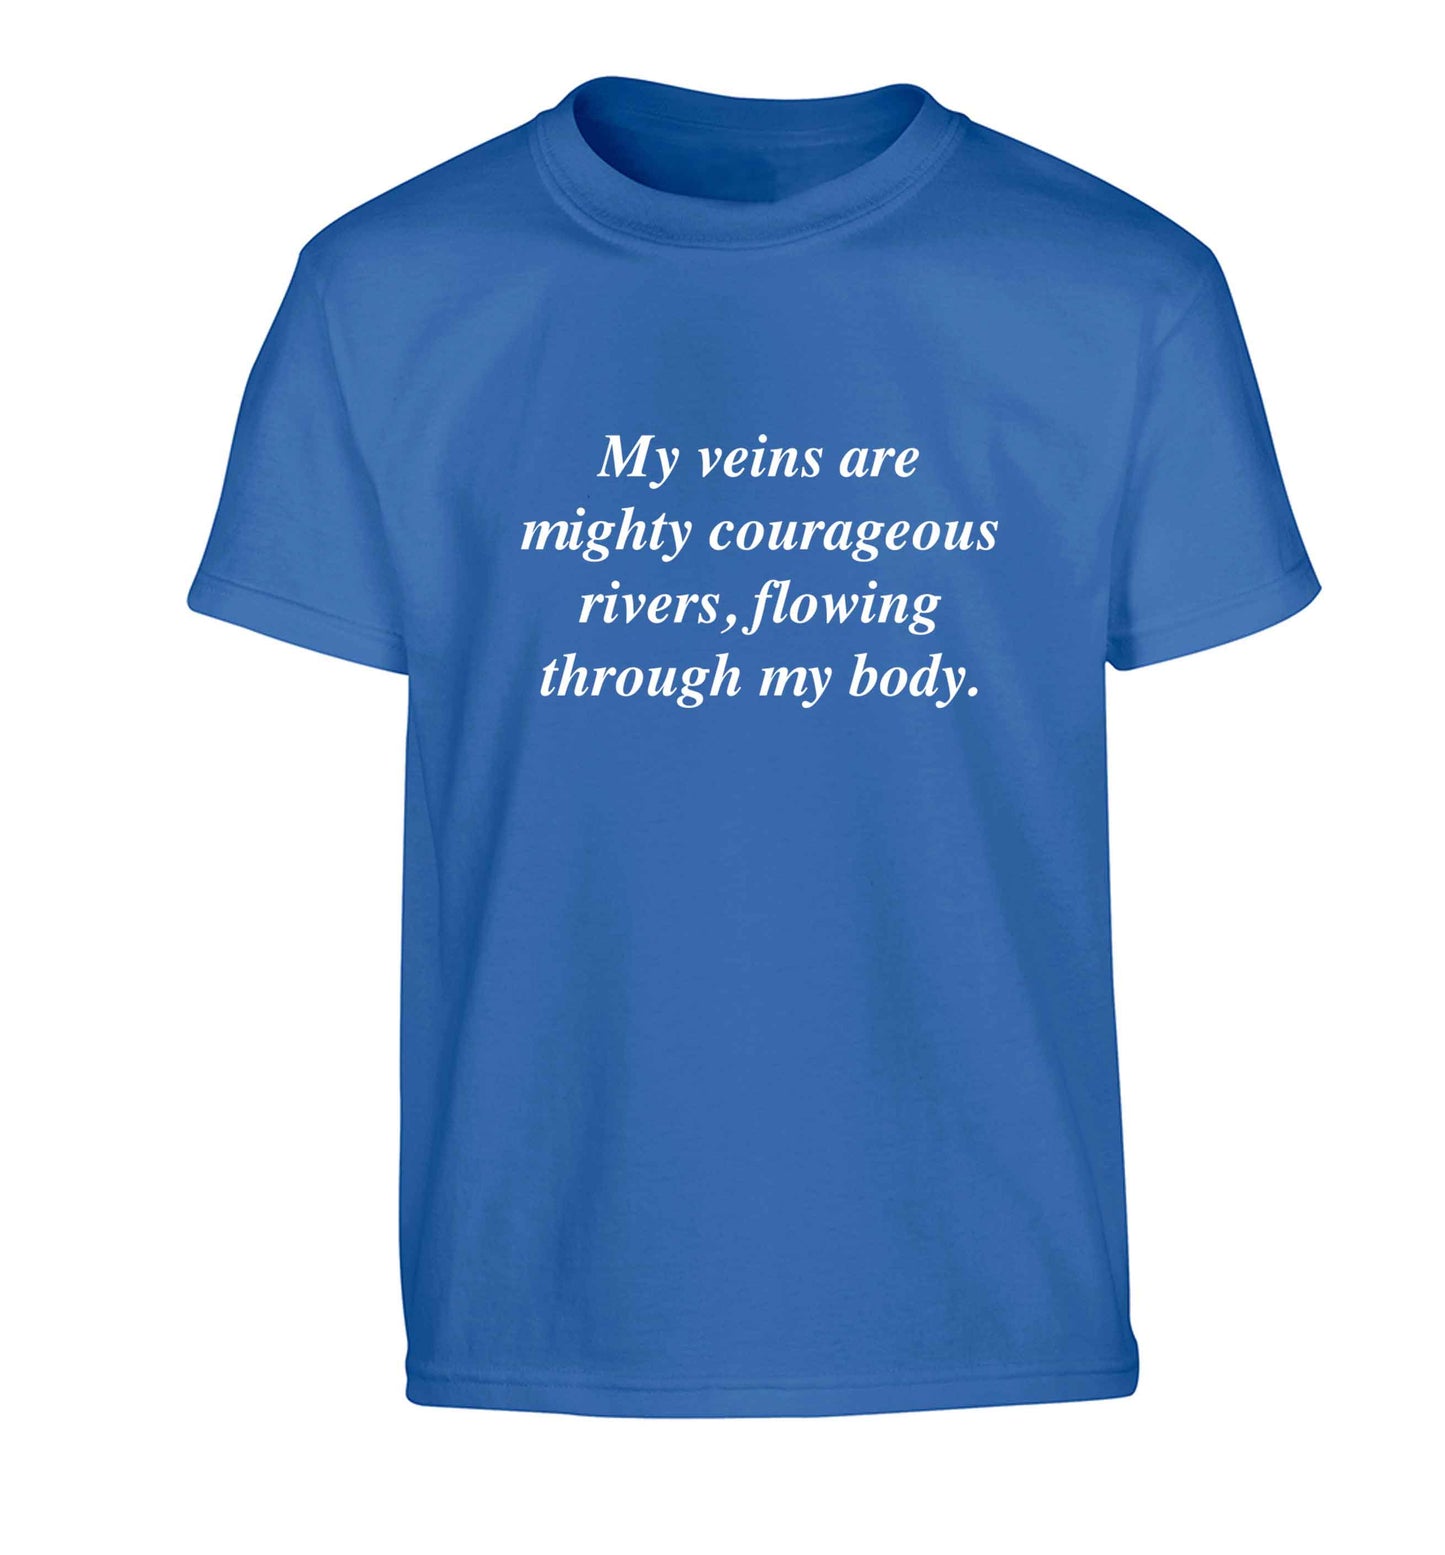 My veins are mighty courageous rivers, flowing through my body Children's blue Tshirt 12-13 Years